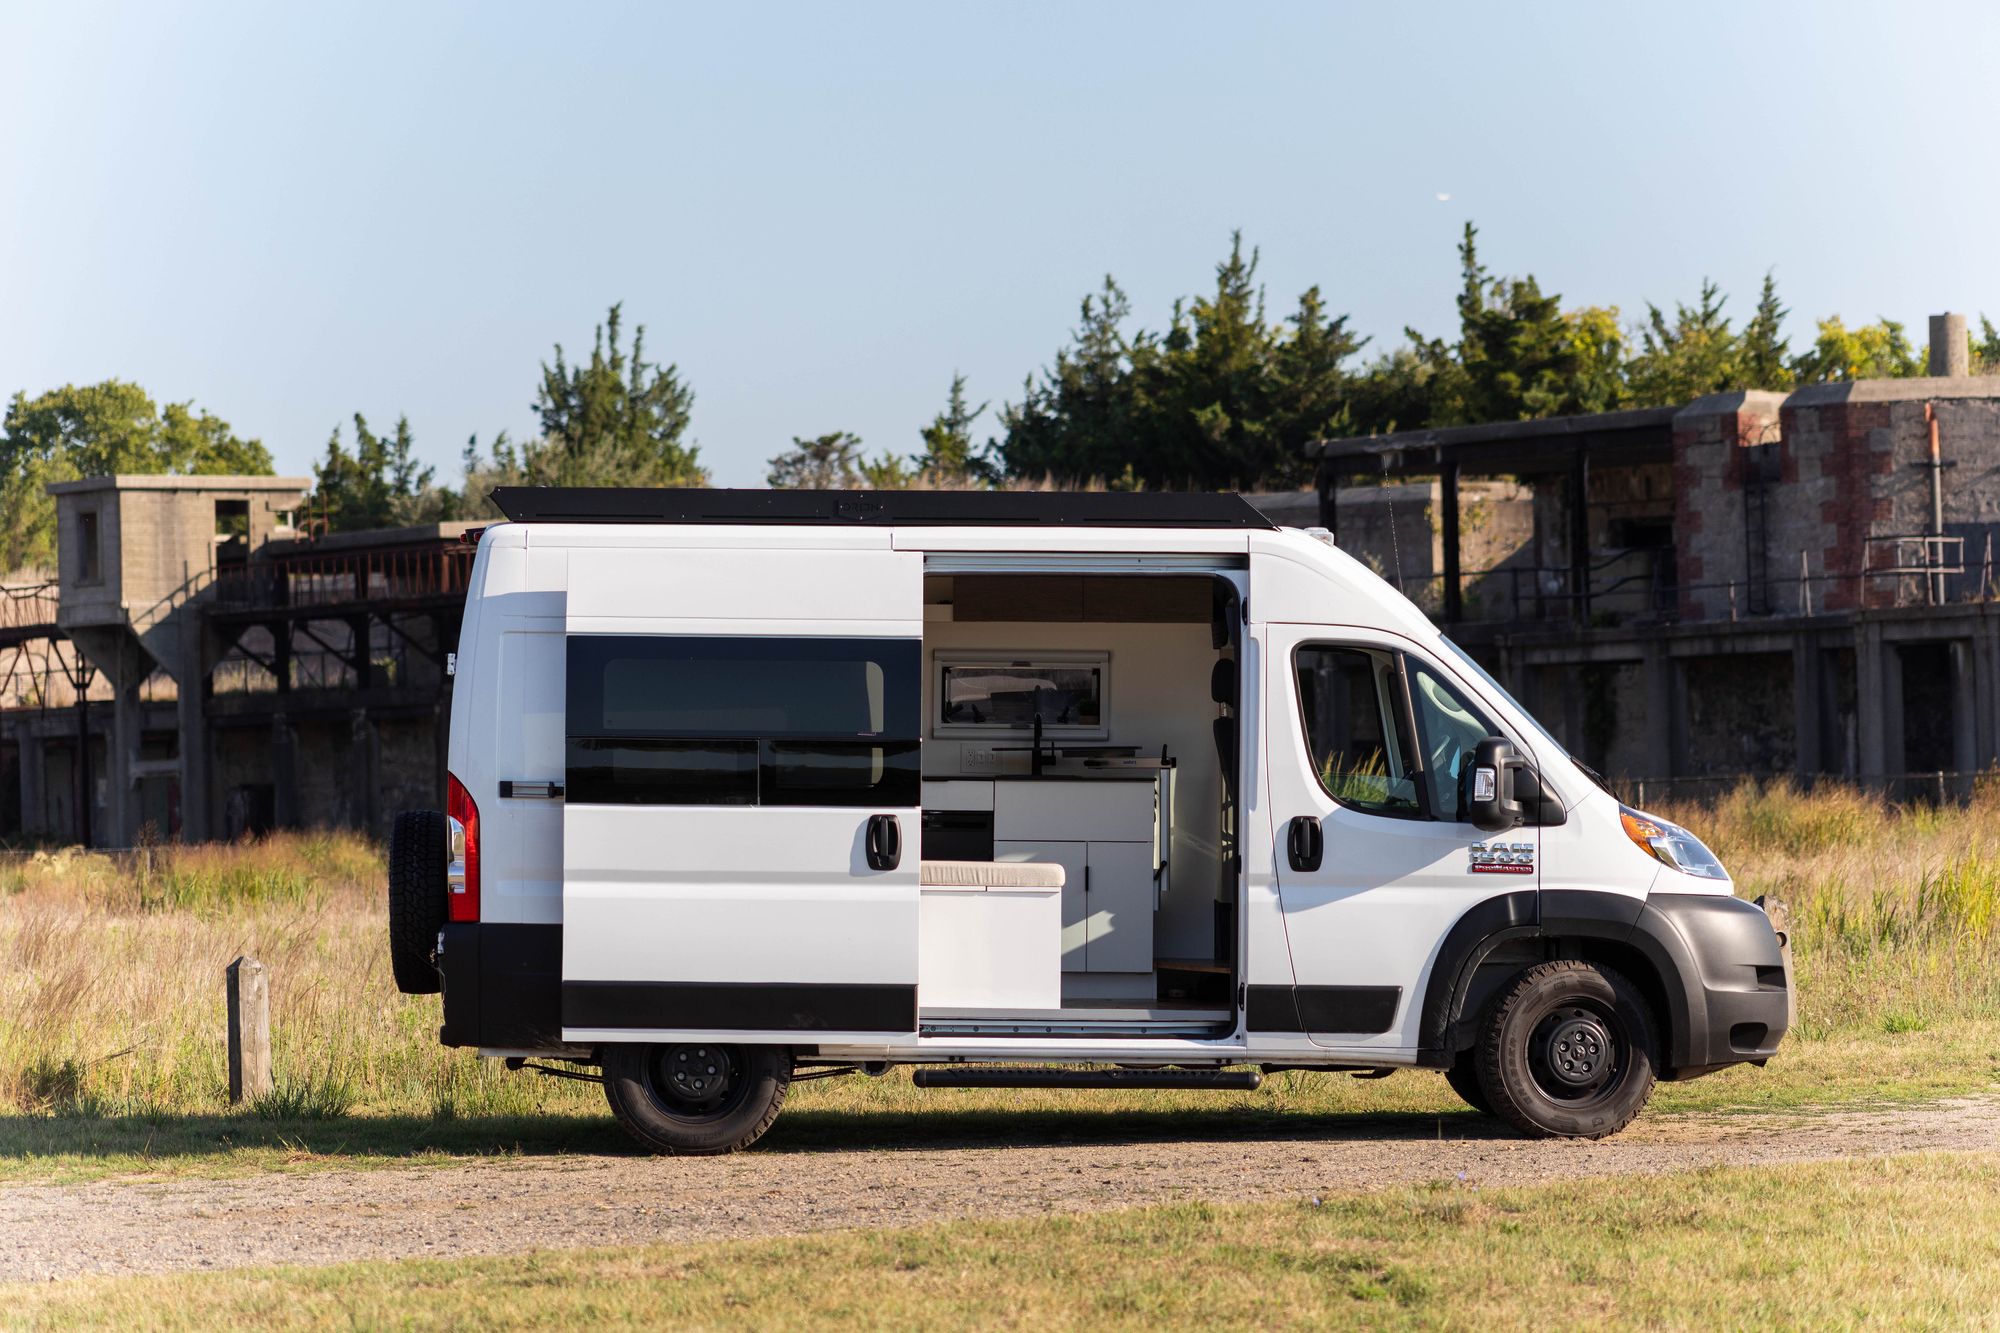 This Ram Promaster 136 High Roof Got Converted Into a Luxurious Off